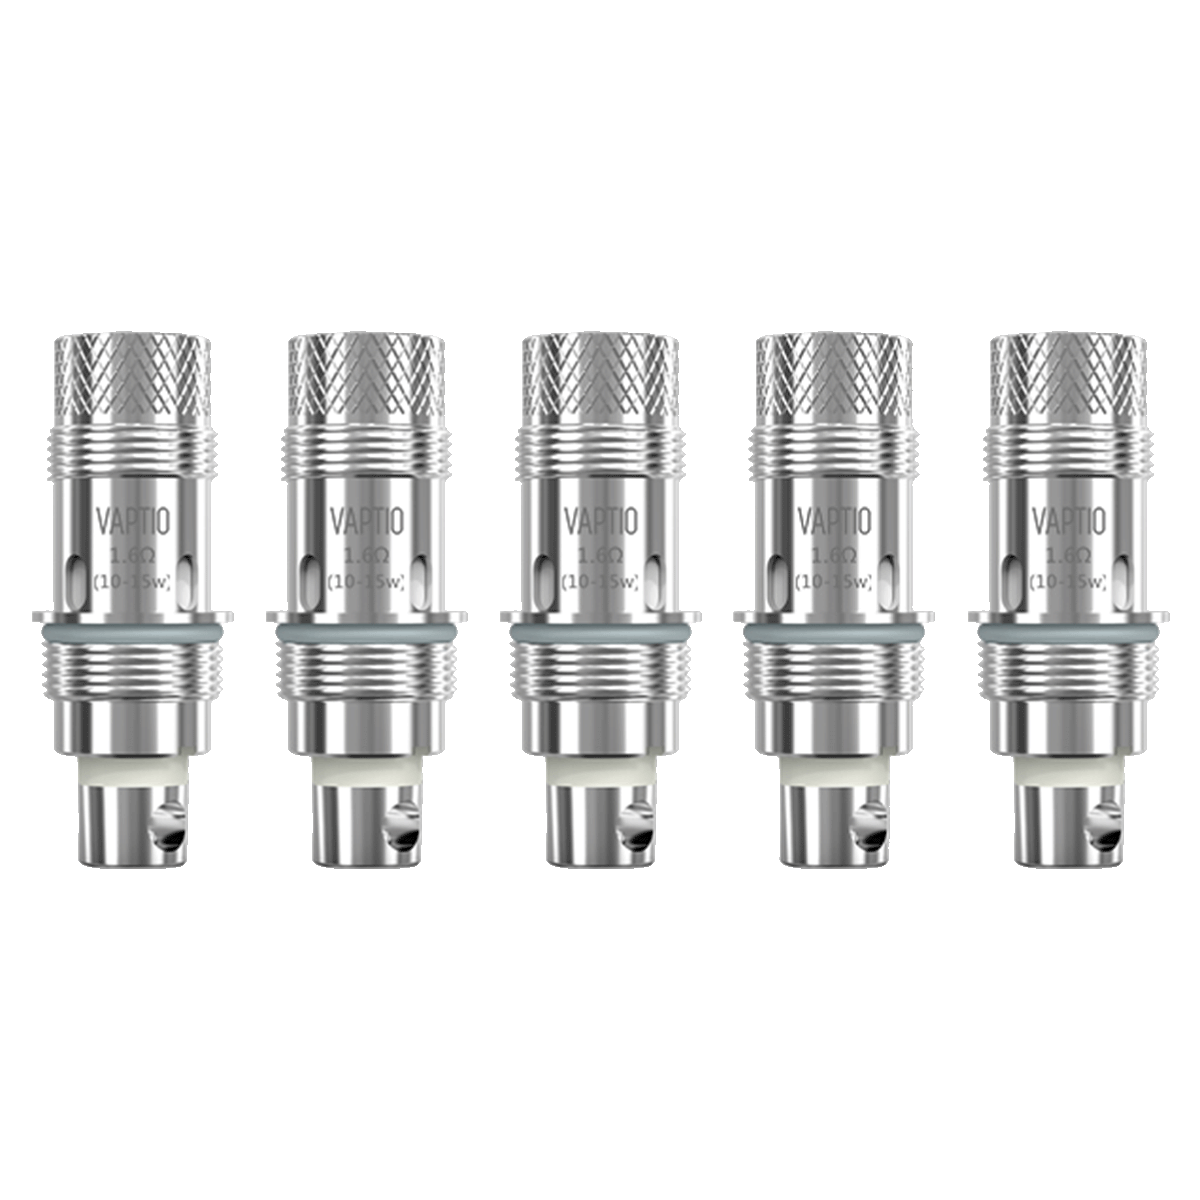 Vaptio Tyro & Cosmo 1.6ohm Coil Pack of 5